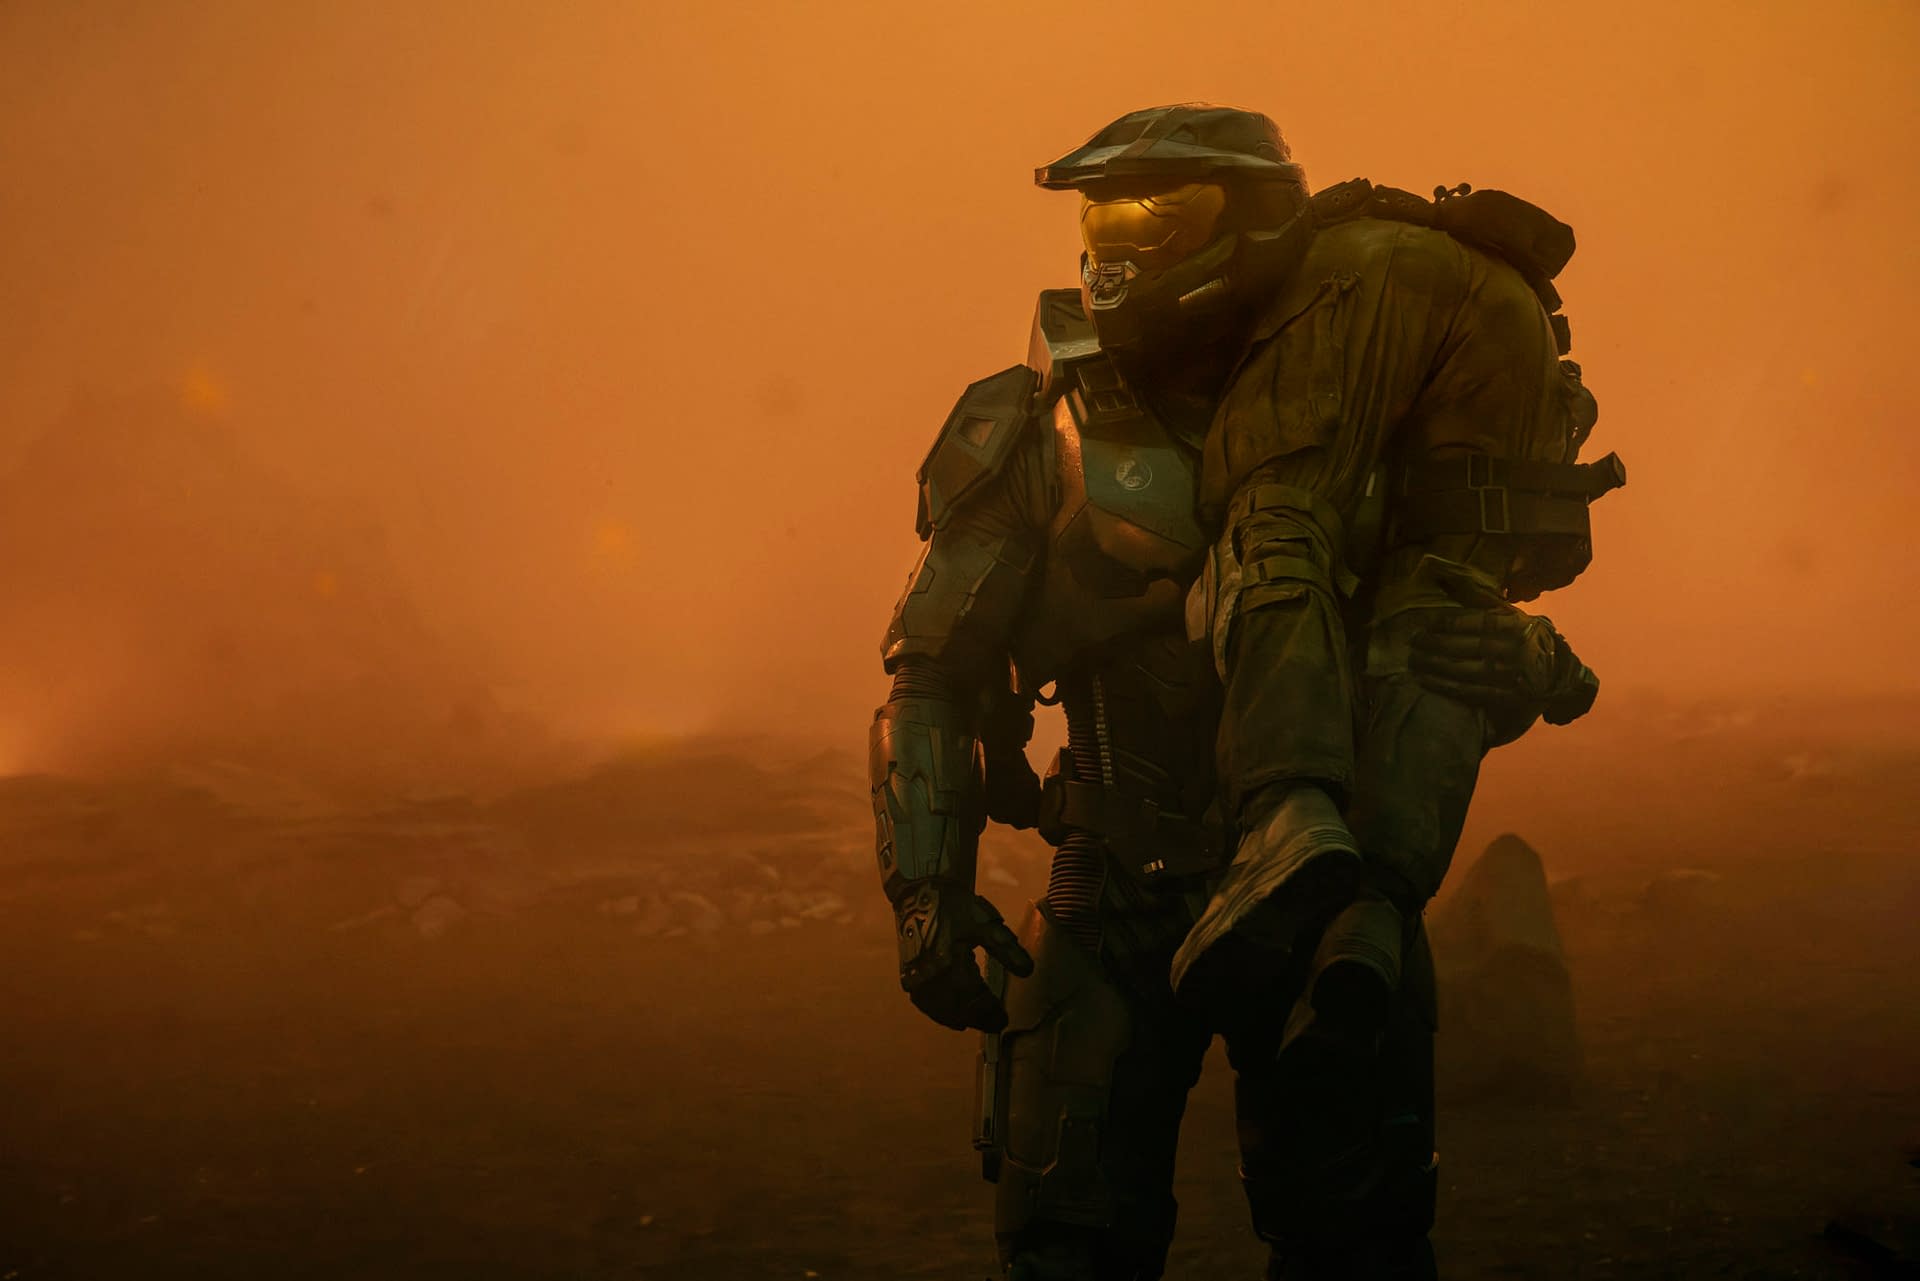 Halo Season 2 Teaser Makes Solemn Vow "You Will Be Remembered"